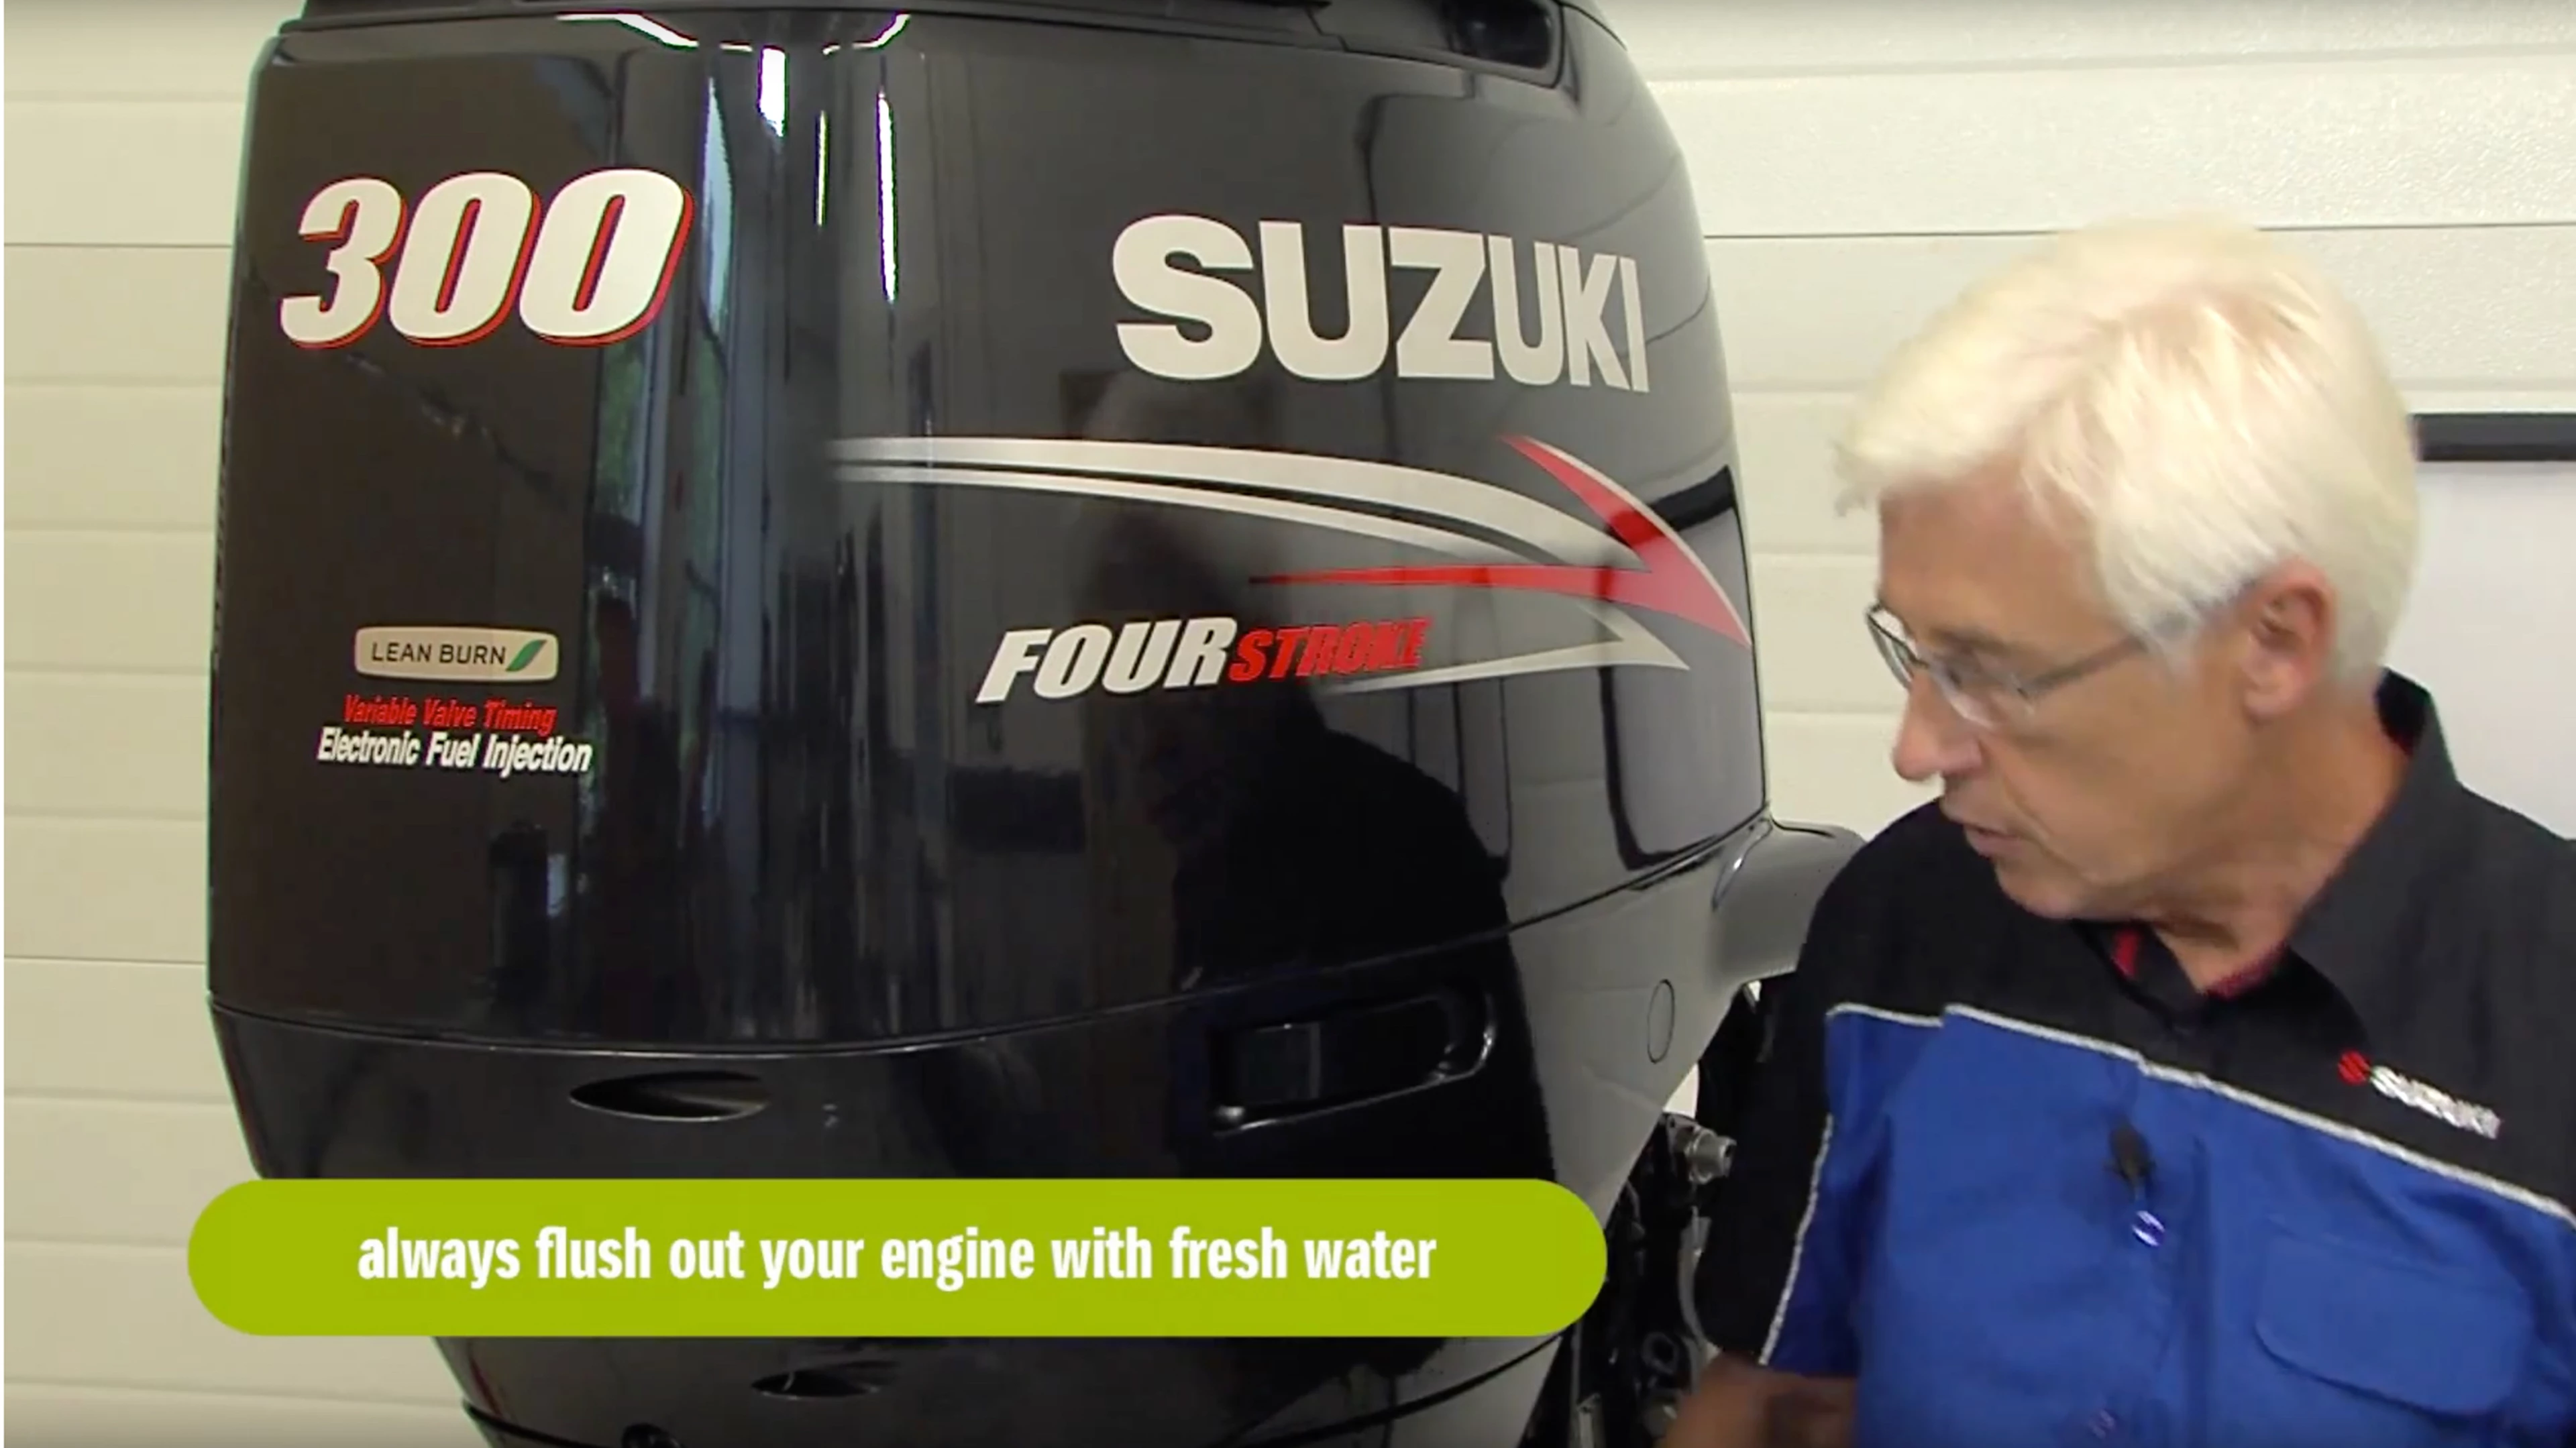 Engineering inspecting Suzuki outboard with manuscript in time.